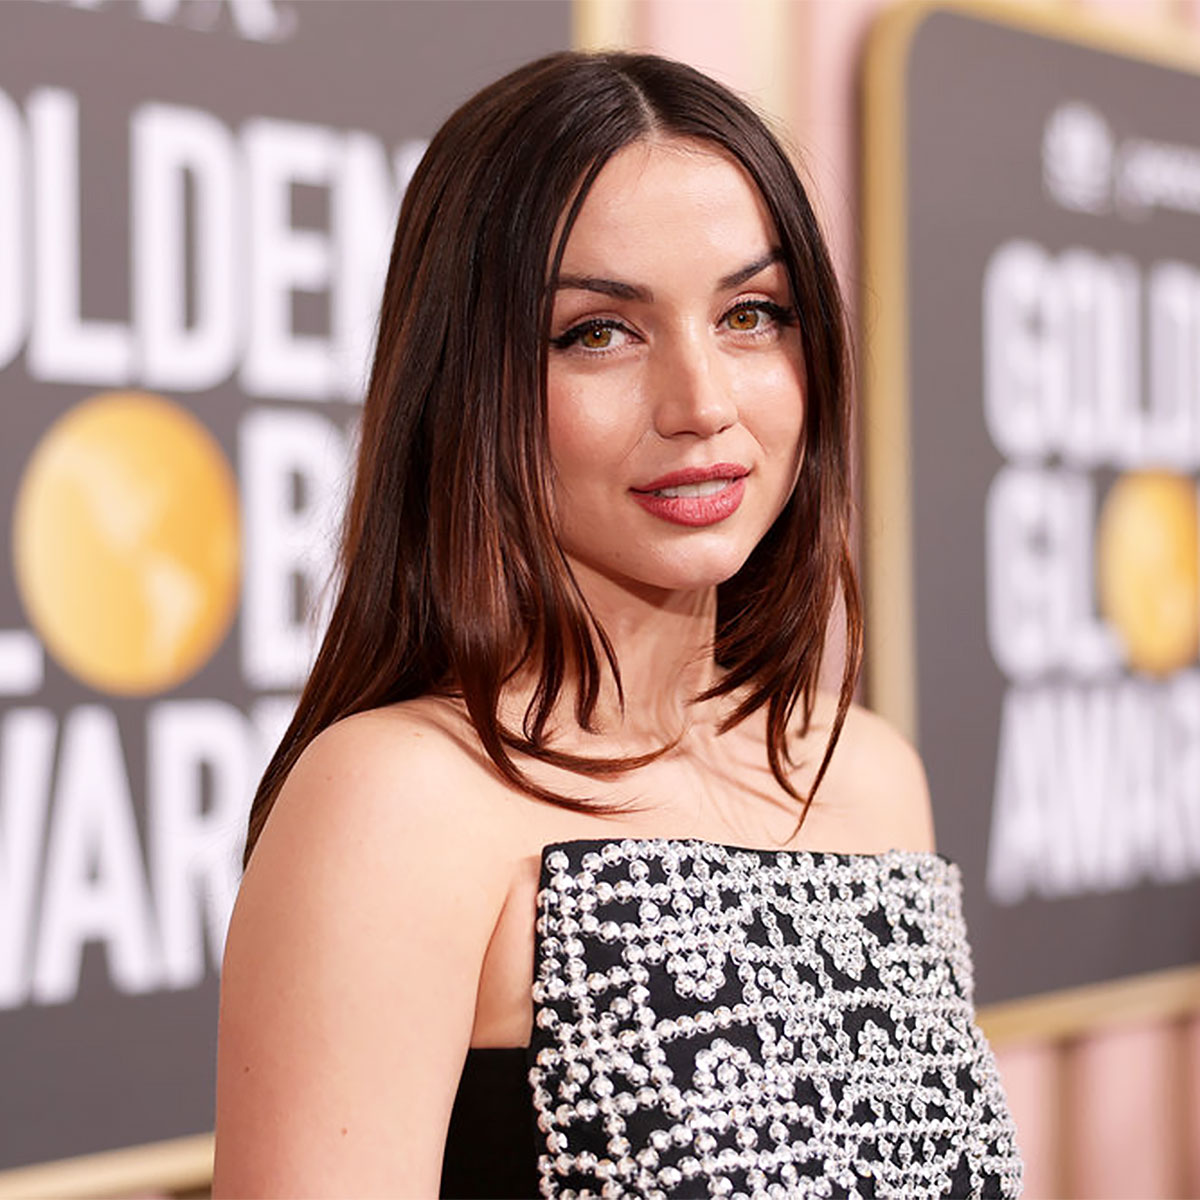 How Ana de Armas's Golden Globes Dress Channeled Old Hollywood